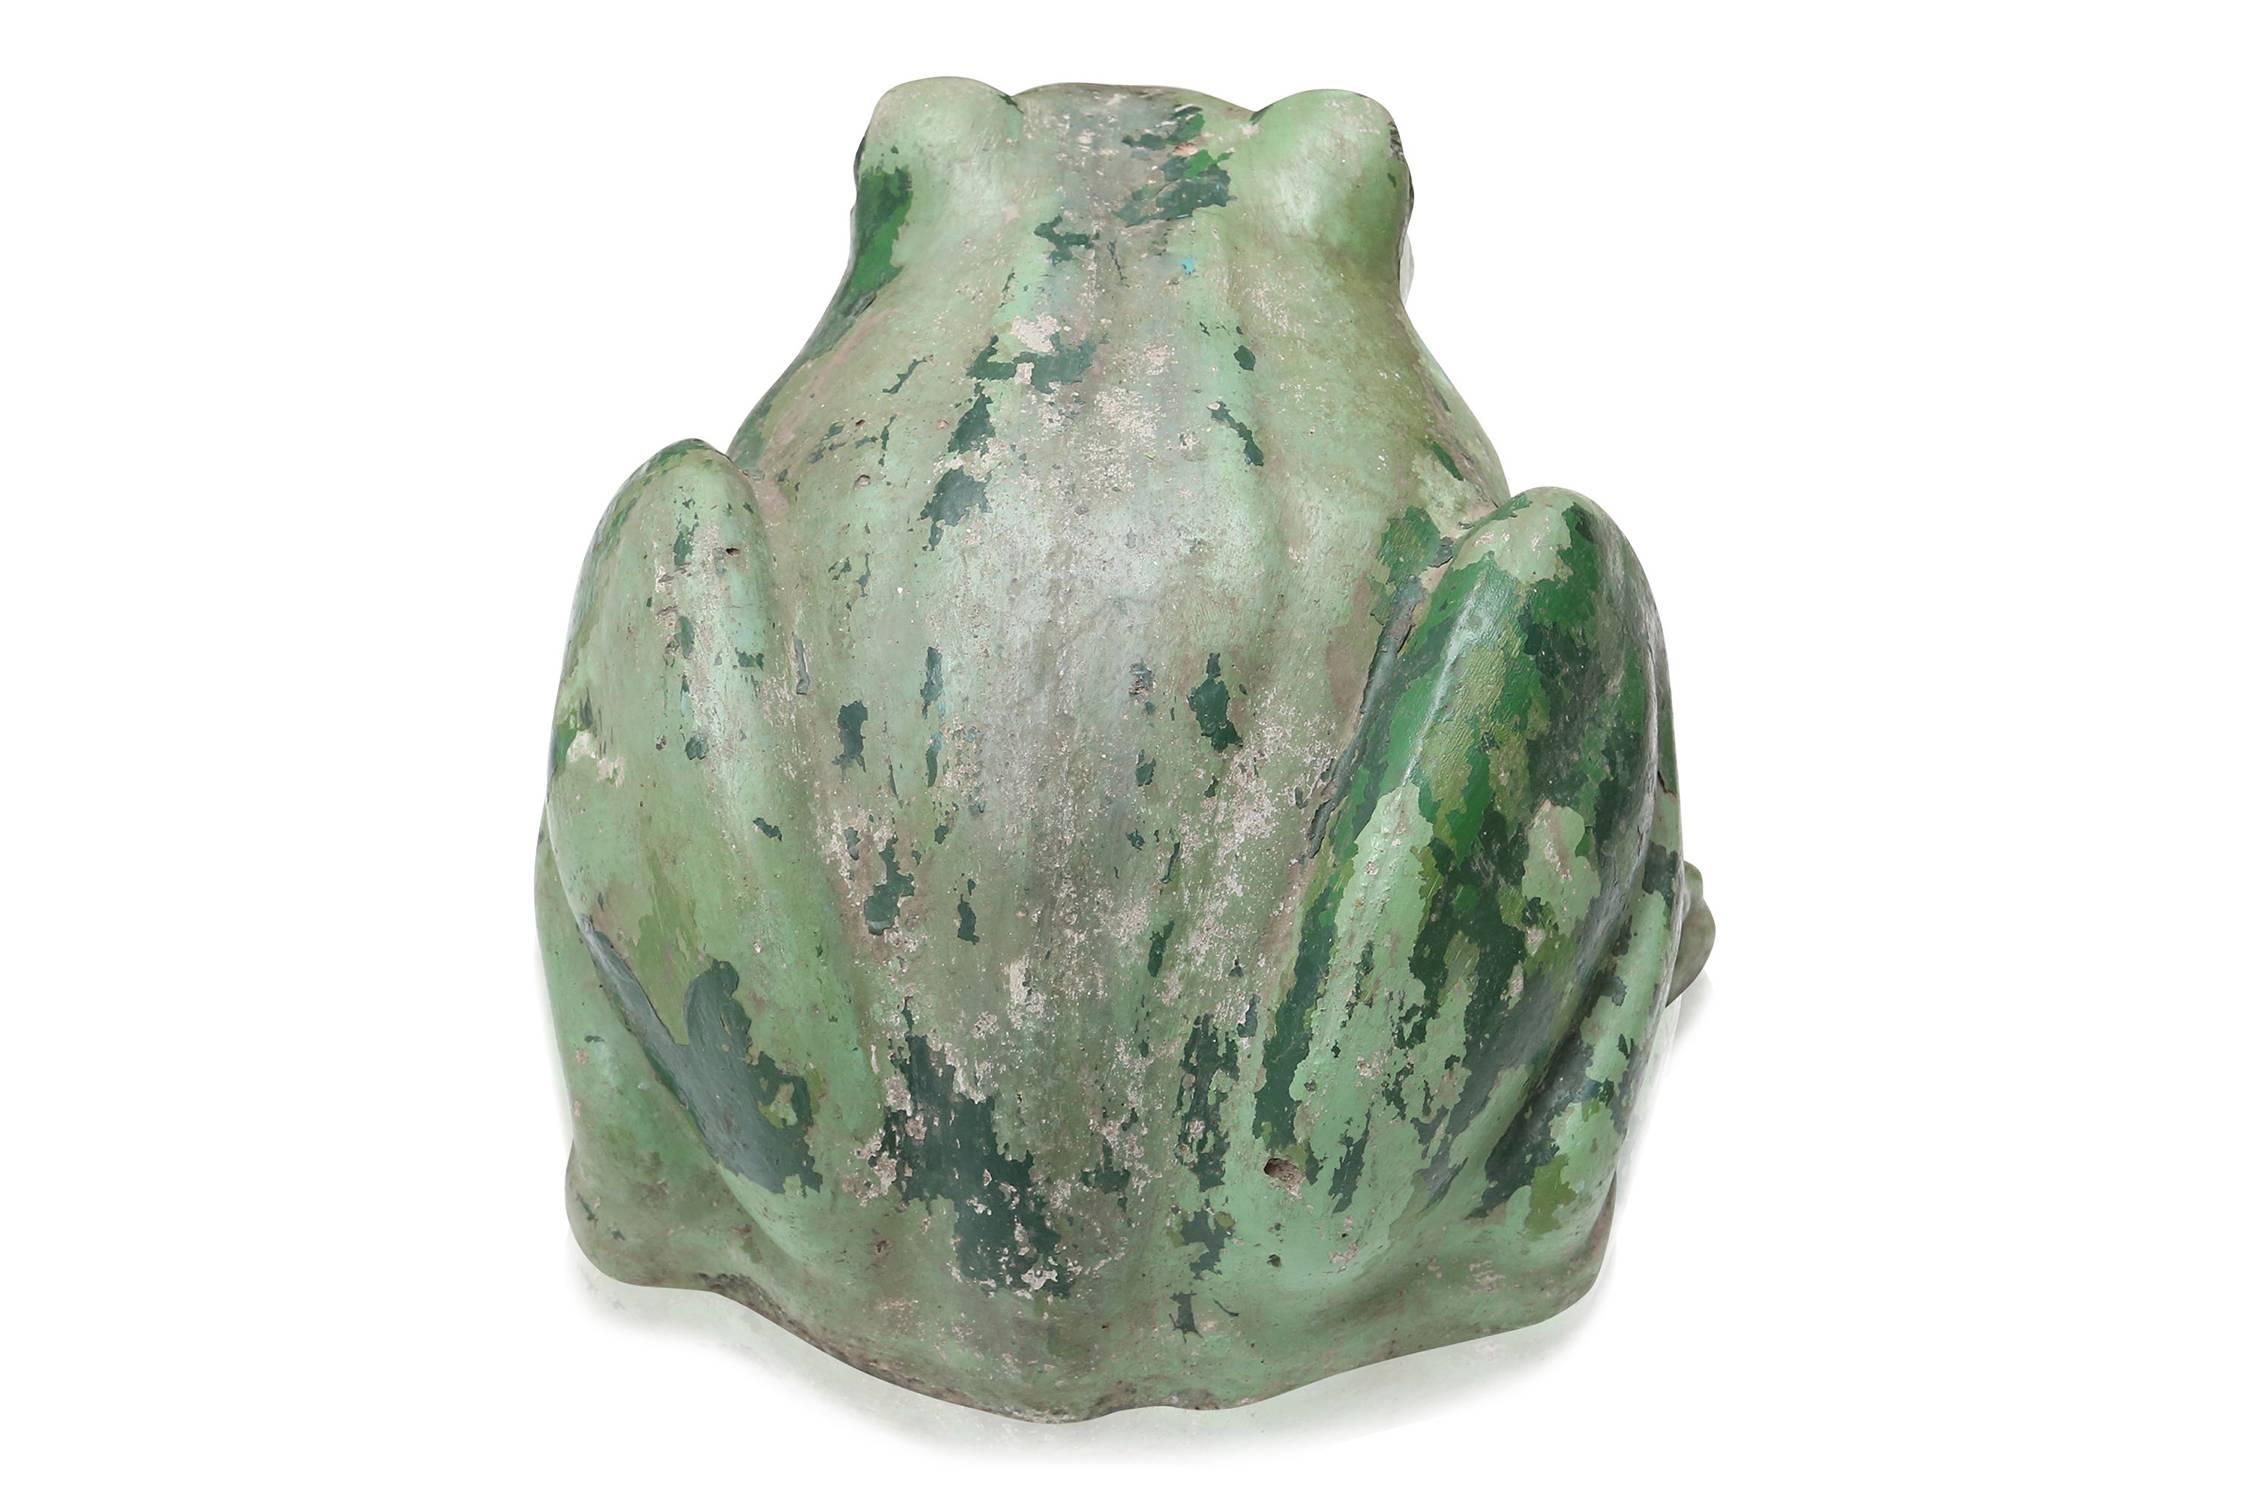 Awesome frog sculpture.
An outdoor piece to be used inside.
Highly decorative, brings a smile.
Measures: L 52 cm, H 32 cm, W 42 cm.